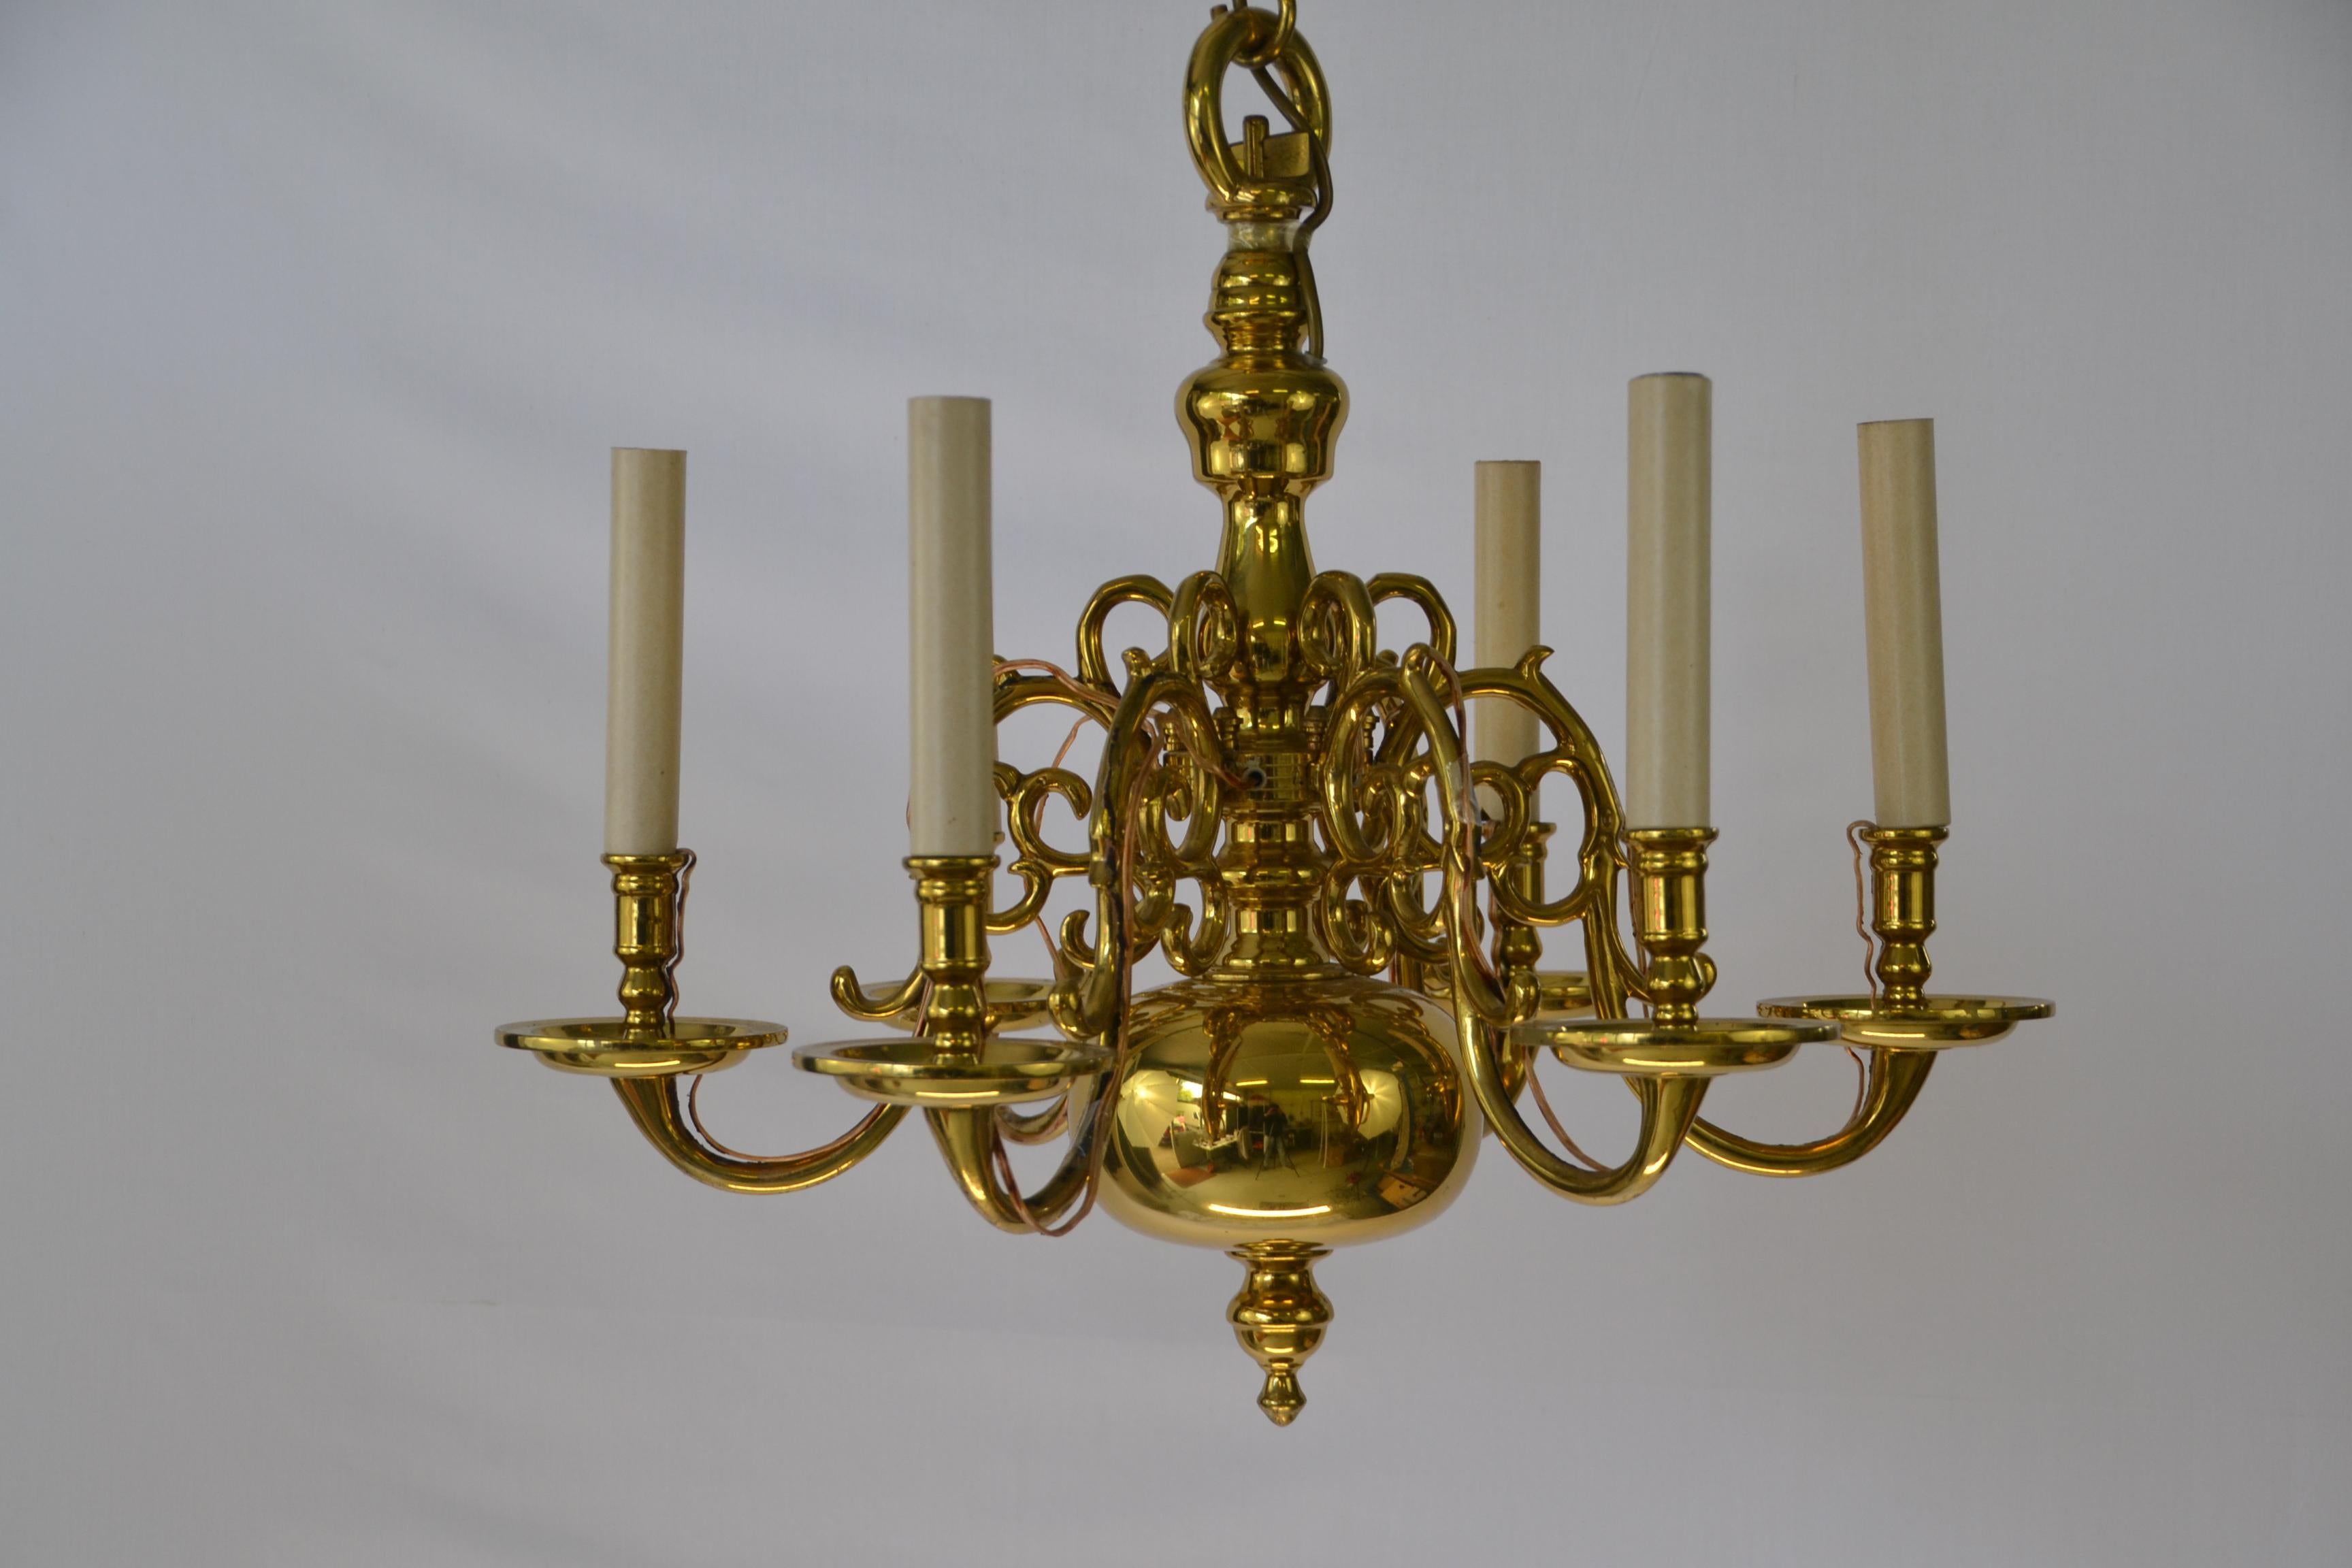 1 Tier 17th Century Electric Model Dutch Brass Chandelier with 6 Lights H54xW57 For Sale 2